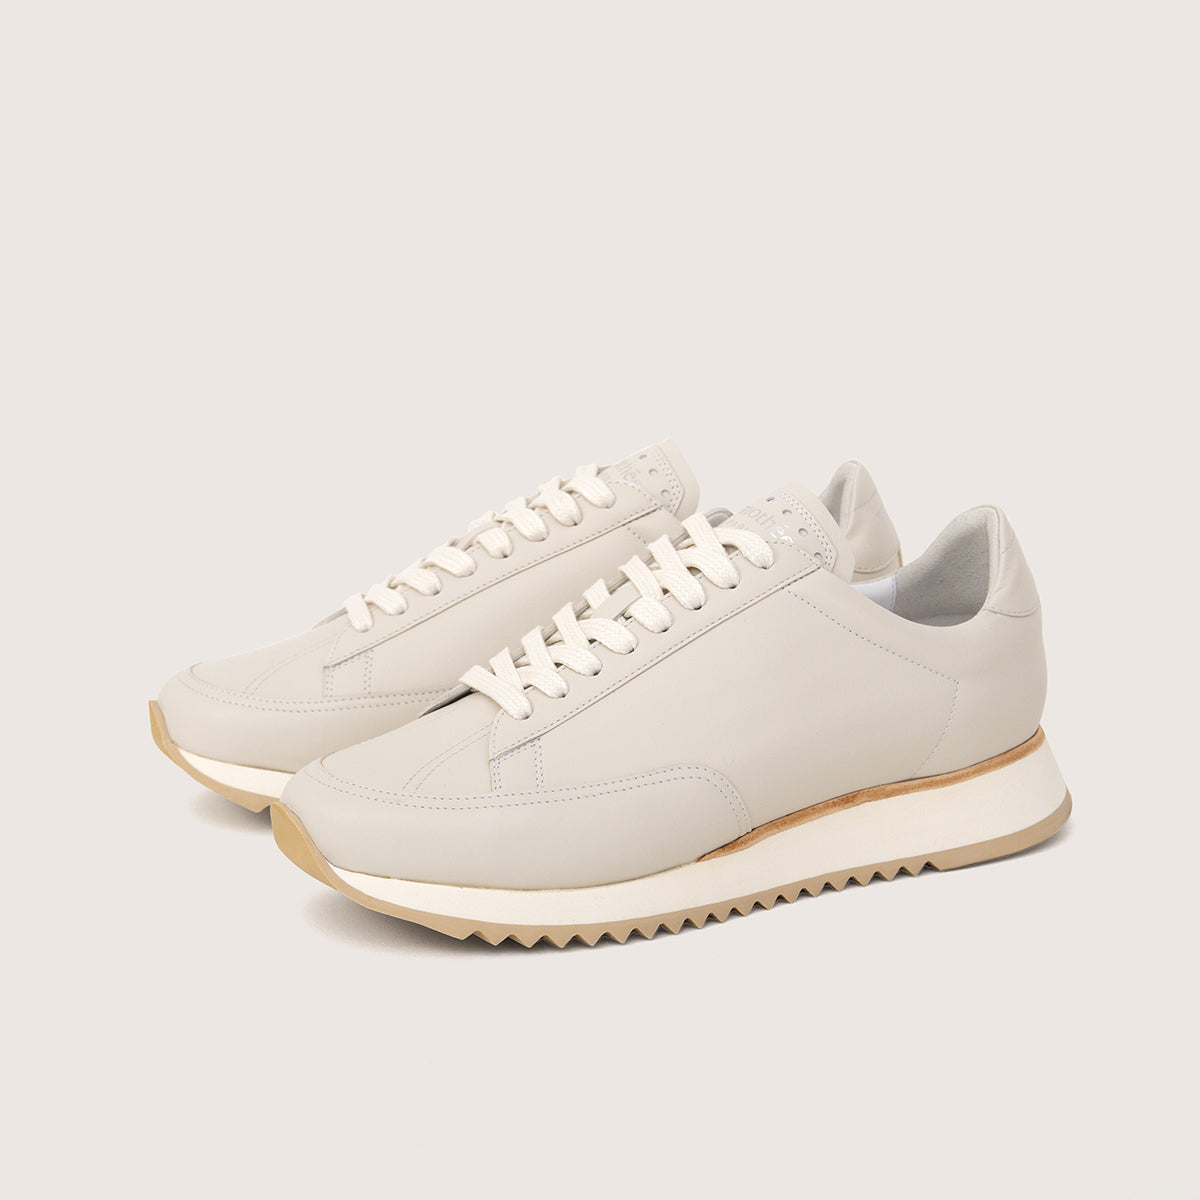 sneaker-cabourg-nappa-vanilla-color-timothee-paris-quarter-view-lifestyle-brand-small-size-picture